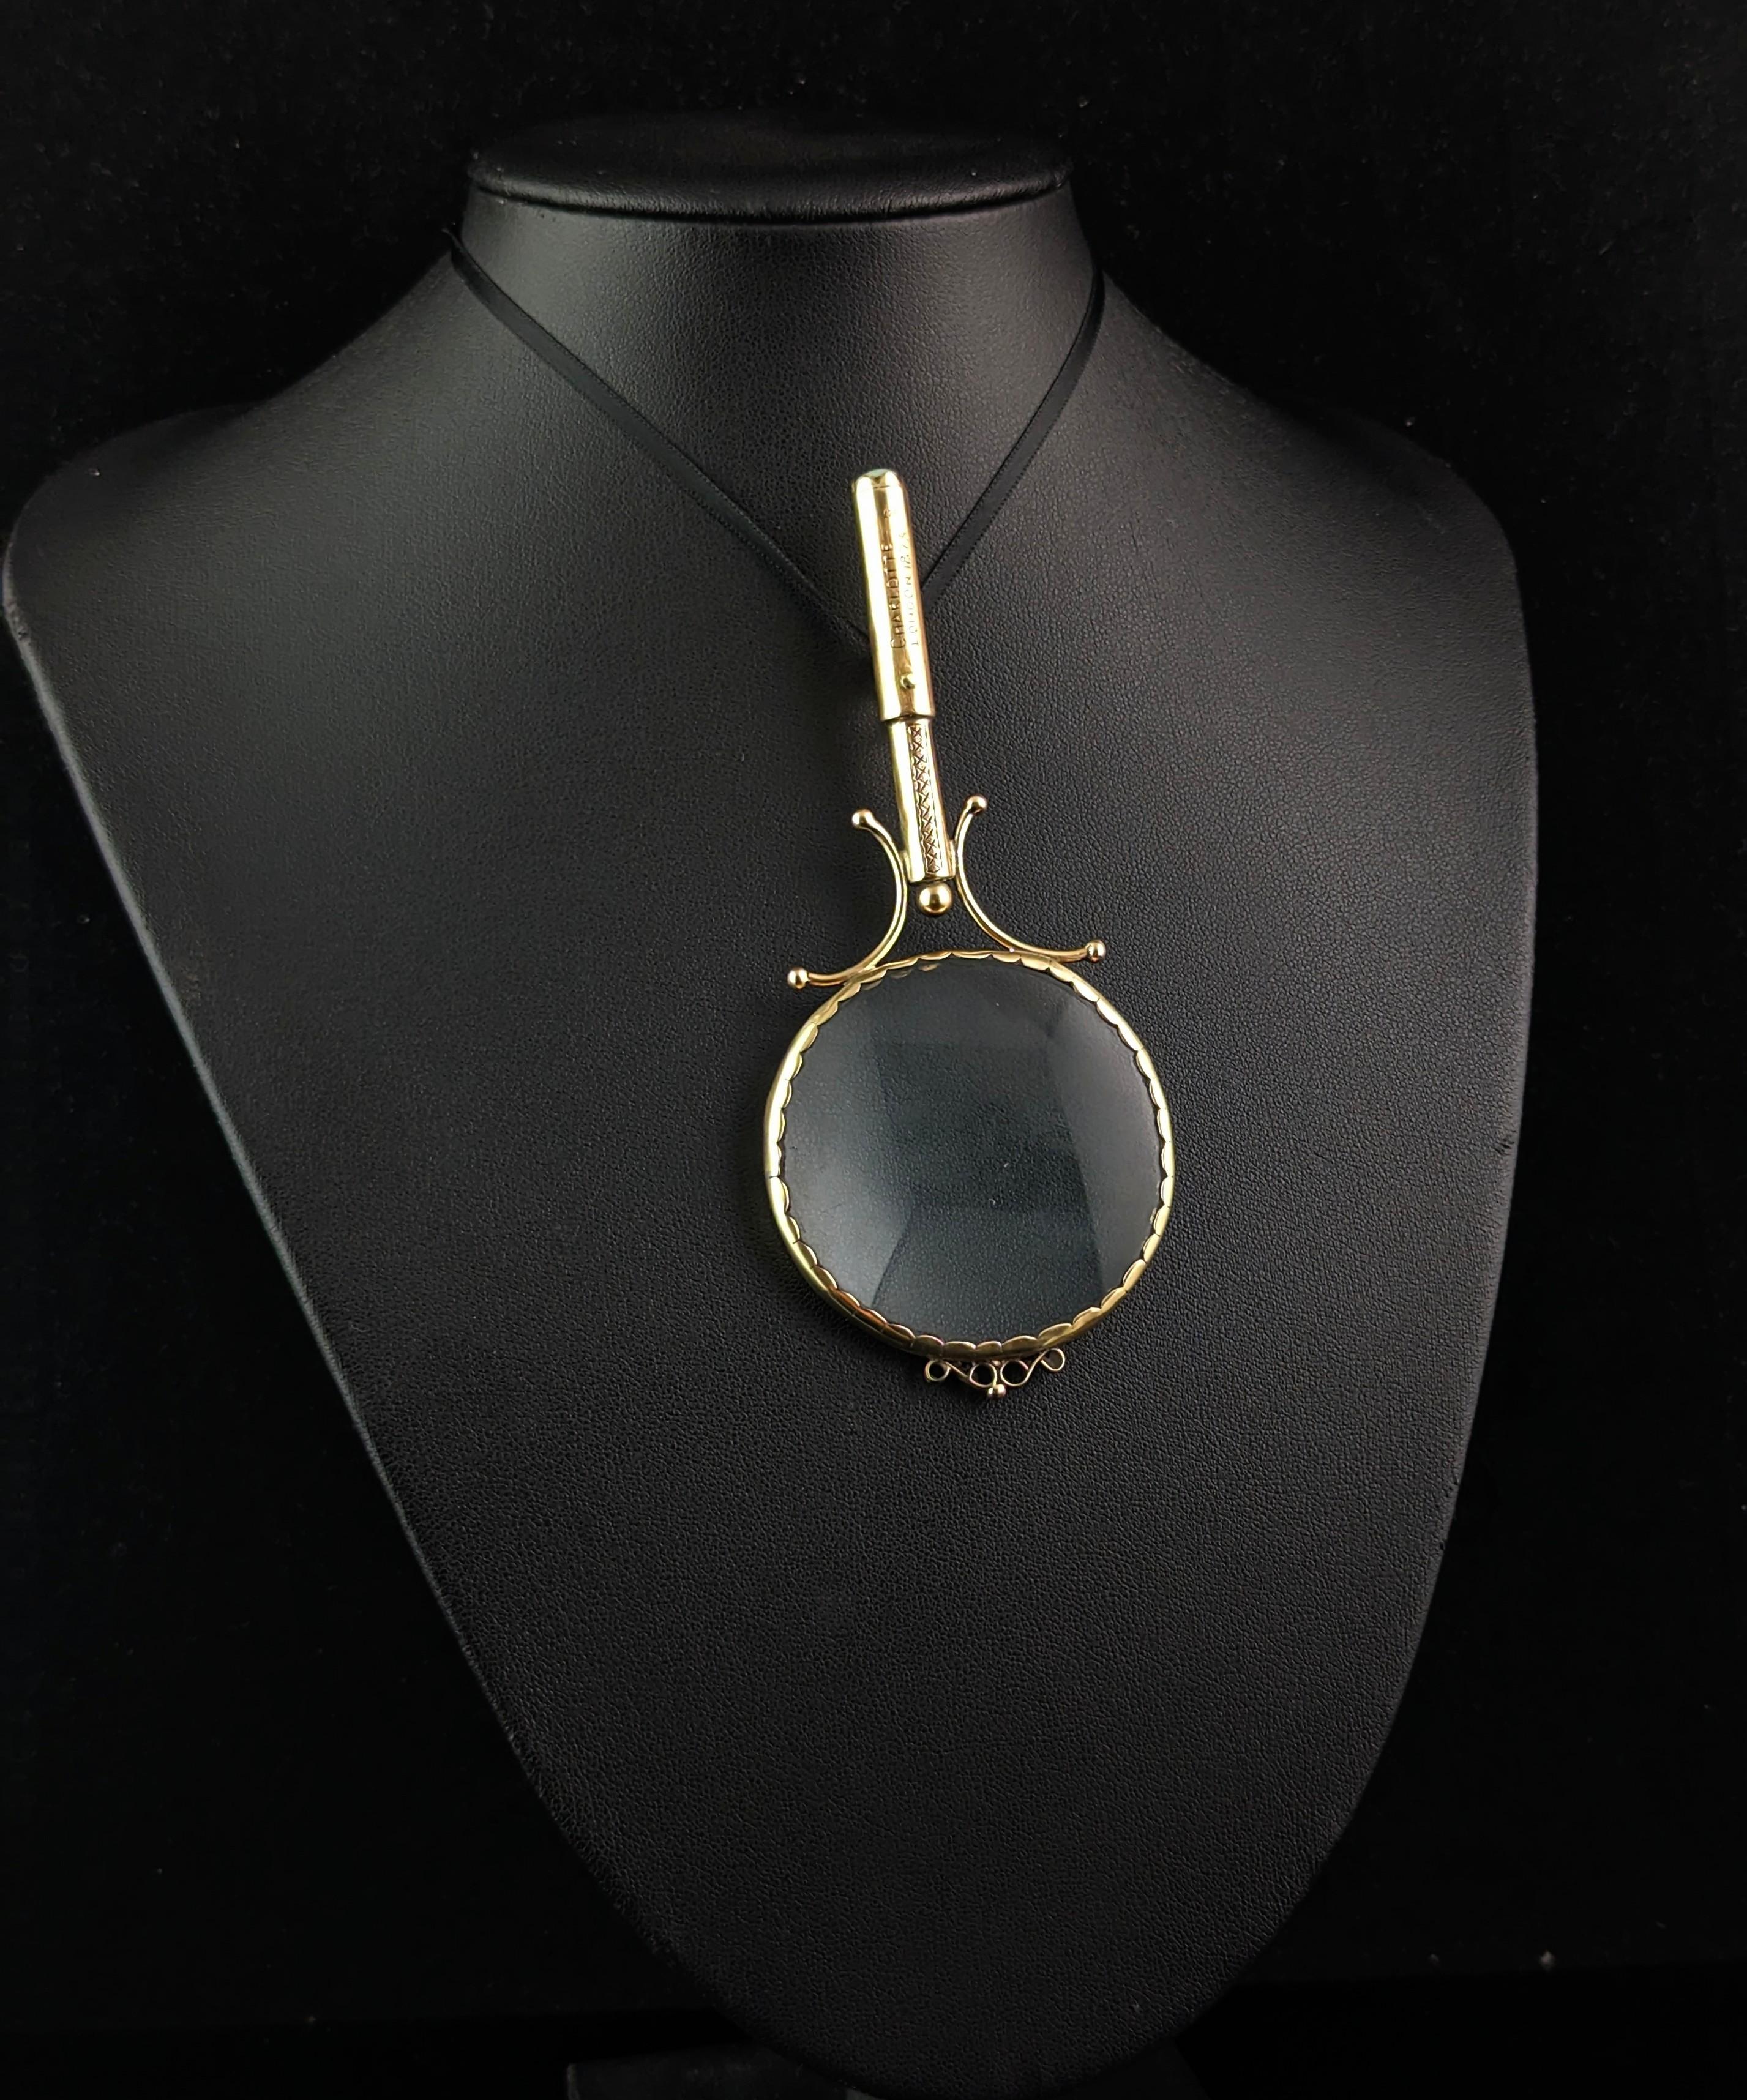 A magical antique 9ct gold opal set magnifying glass pendant.

It is a larger piece much larger than say a quizzing glass and is more the size of a traditional small magnifying glass, it has the original heavy glass lense, perfectly preserved in